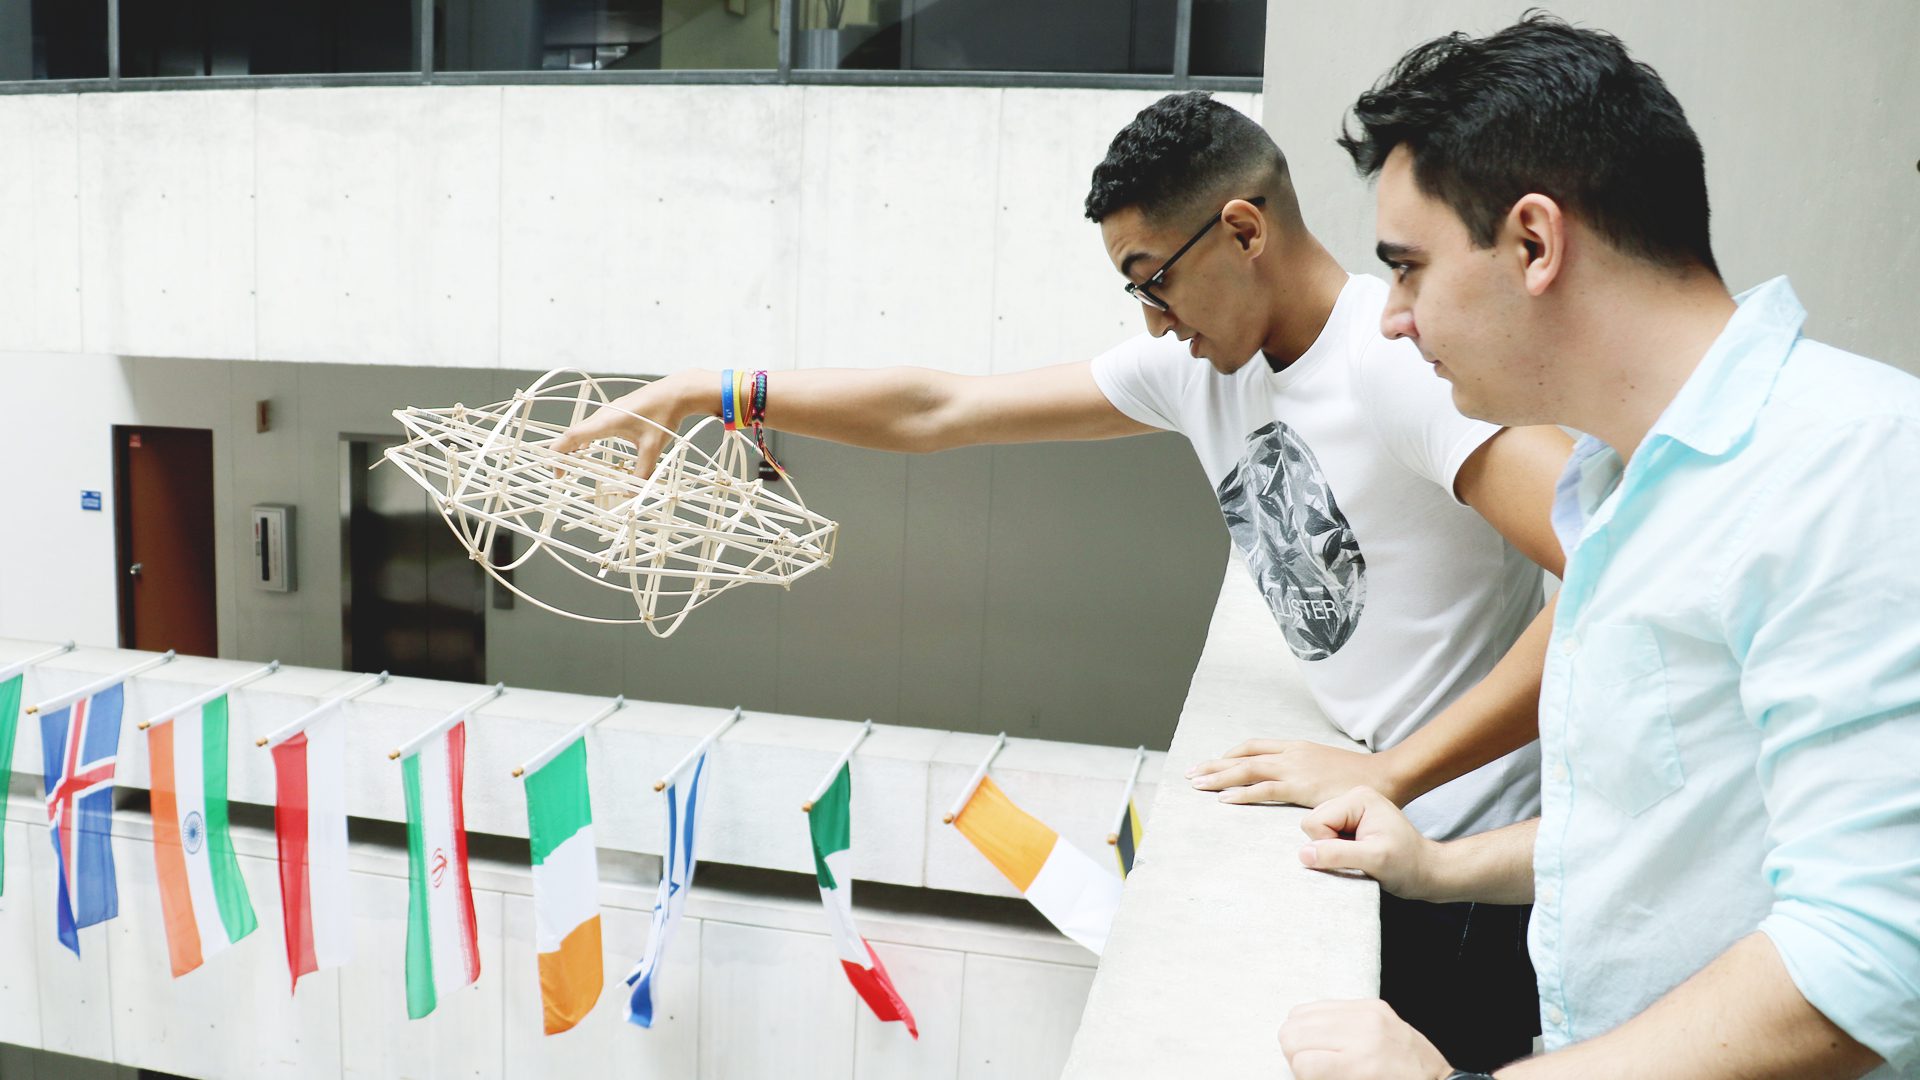 Students test their design theories in Building 1 at MDC Wolfson Campus